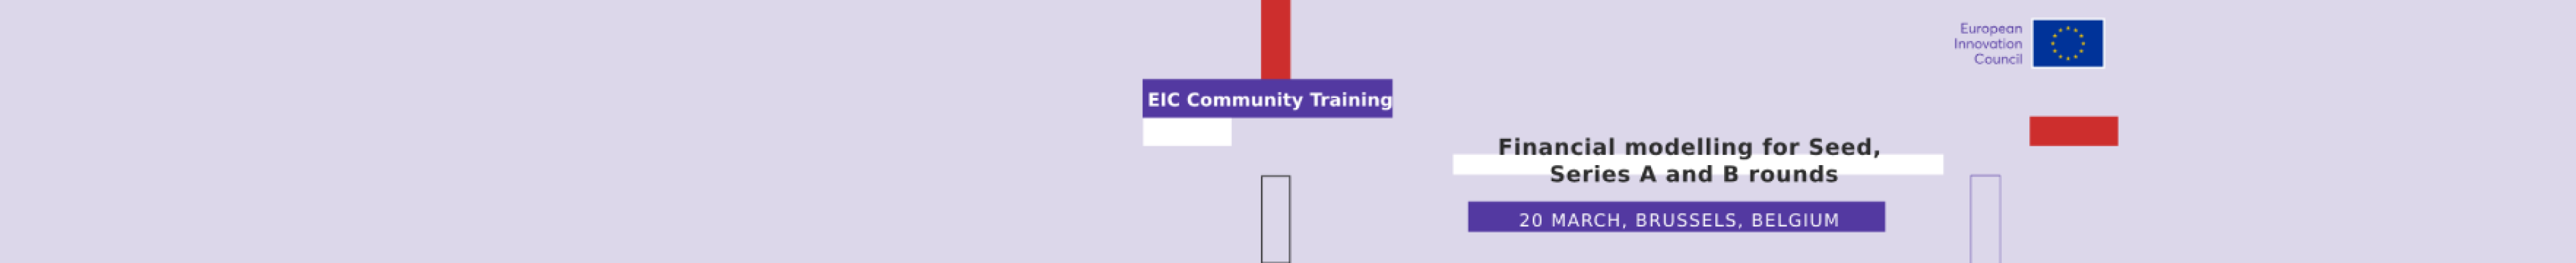 Open Call - EIC Community Training: How to Build a Solid and Sustainable Future for your Innovation